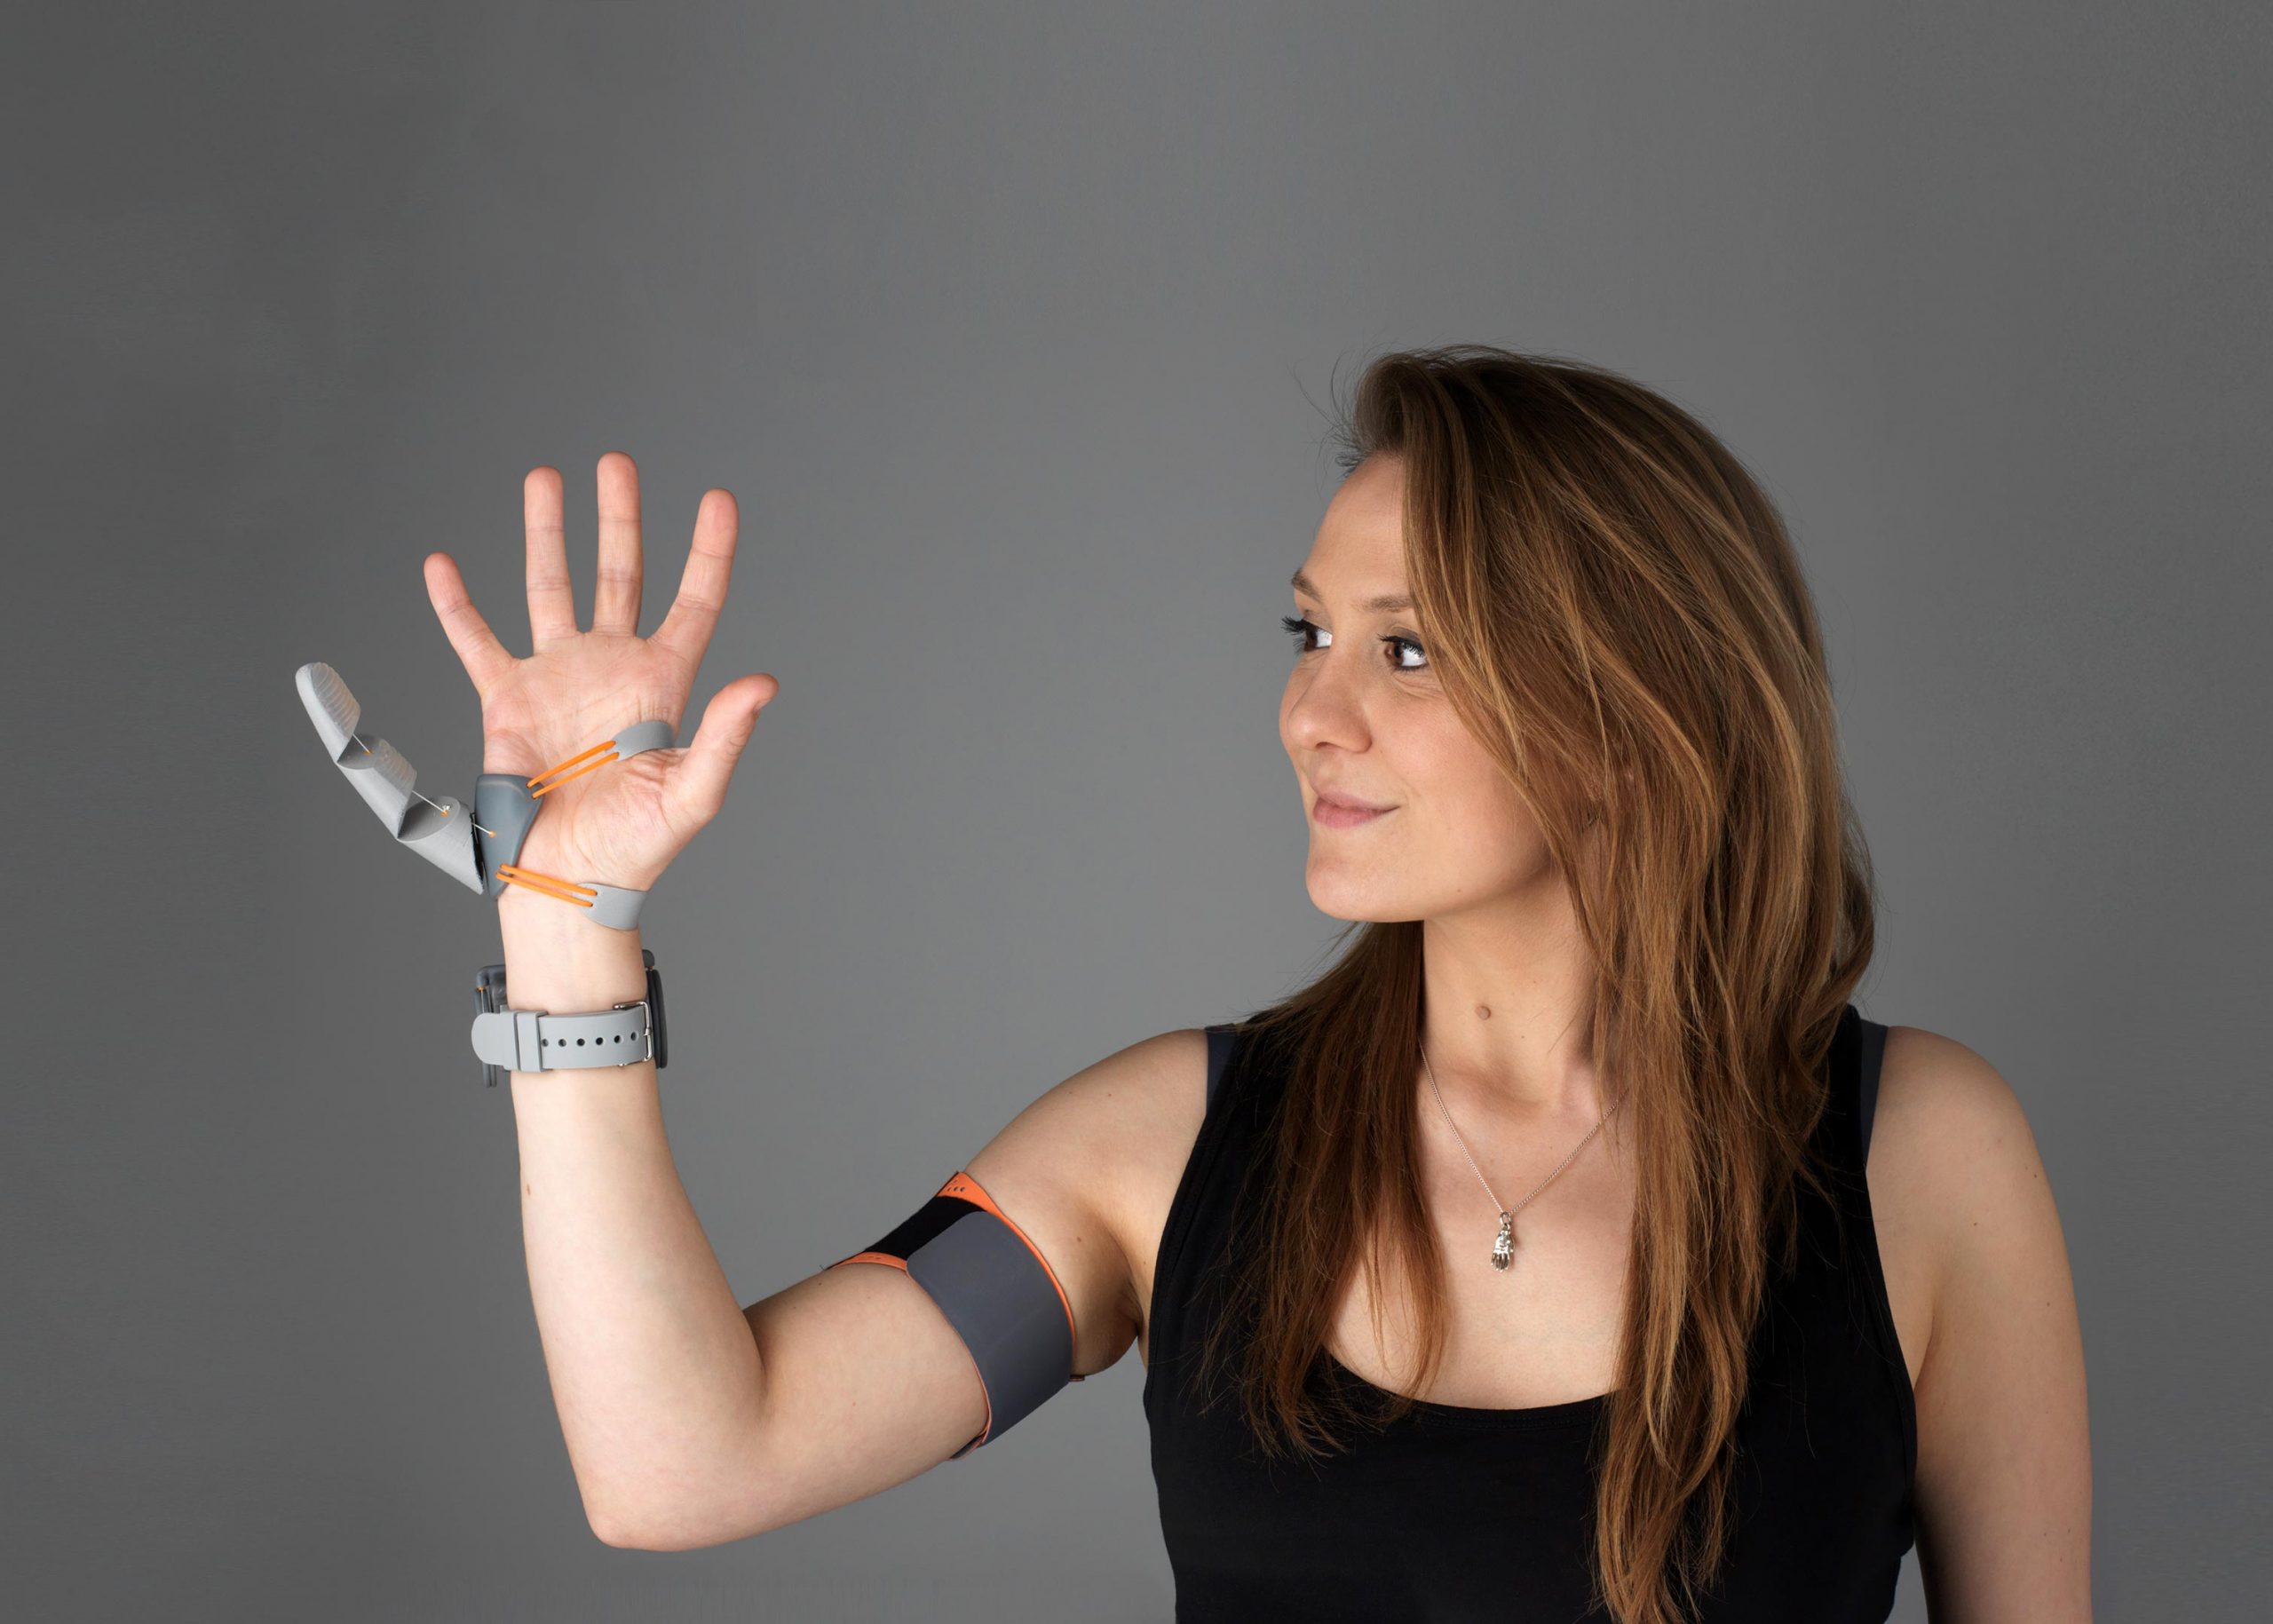 Robotic “Third Thumb” Use Can Alter How the Hand Is Represented in the Brain